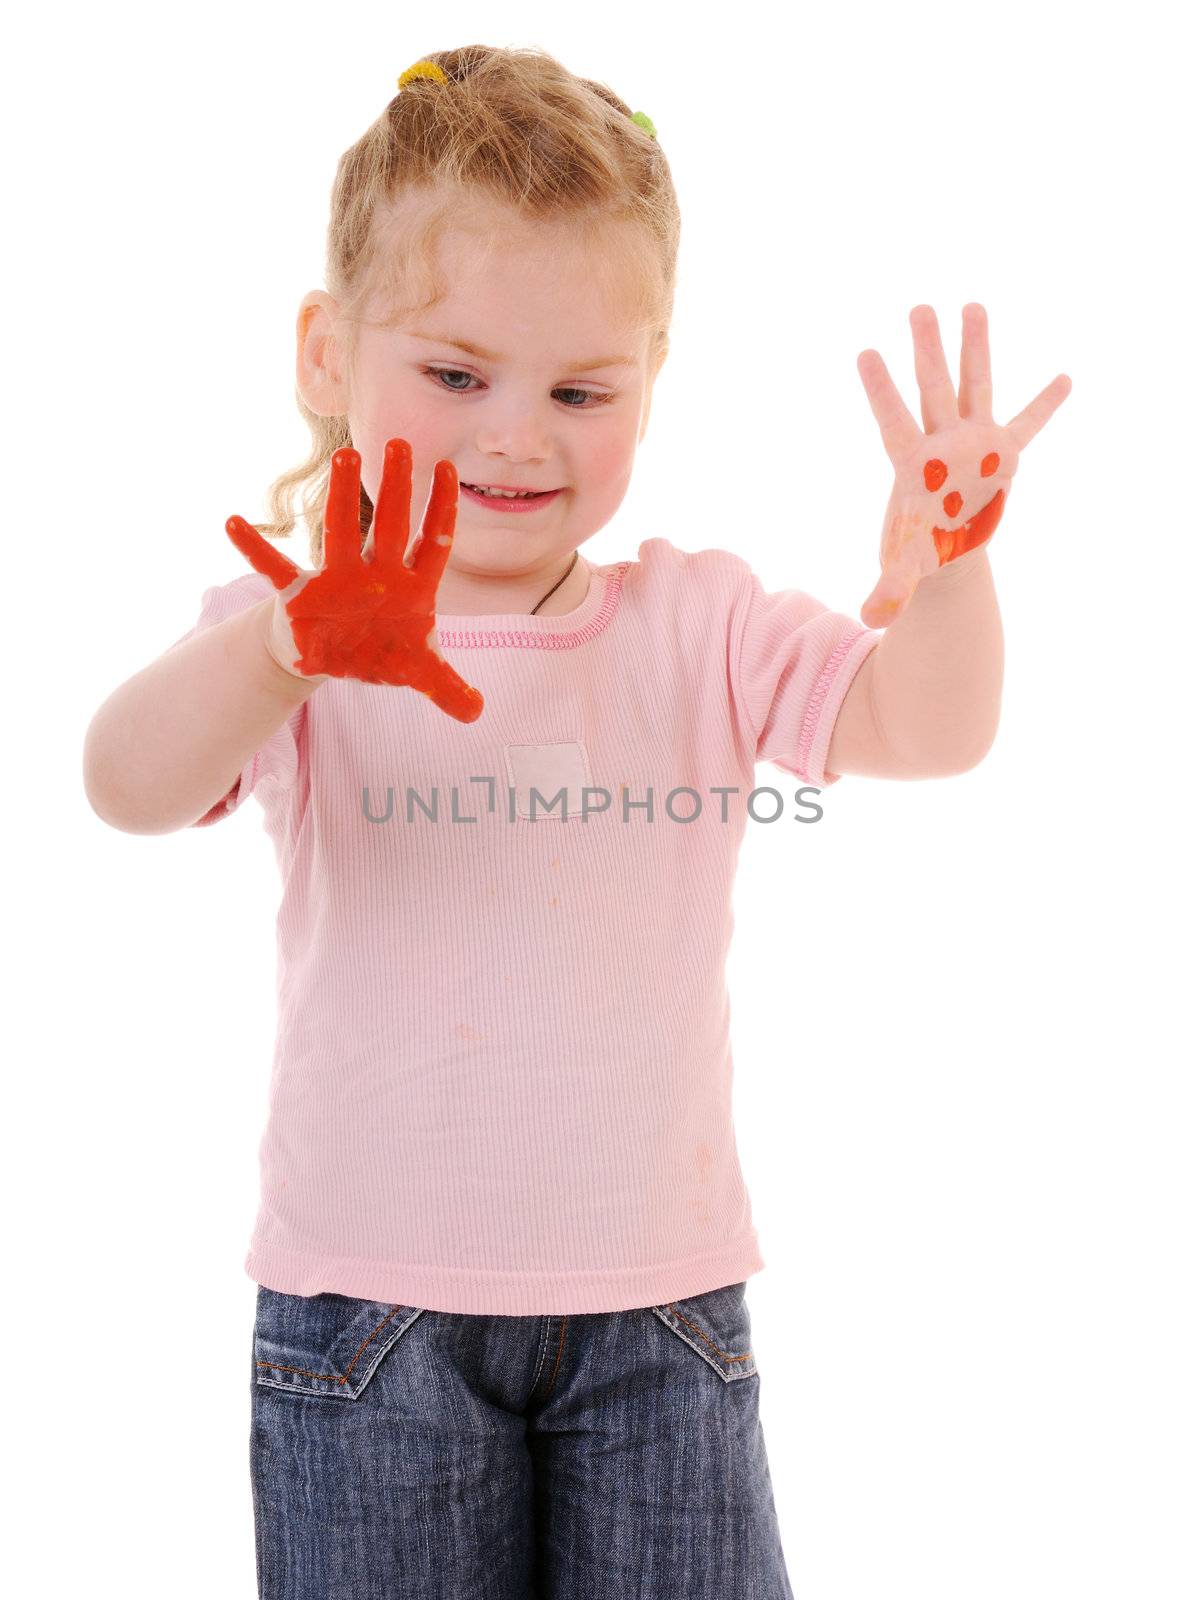 Happy child with painted hands by iryna_rasko